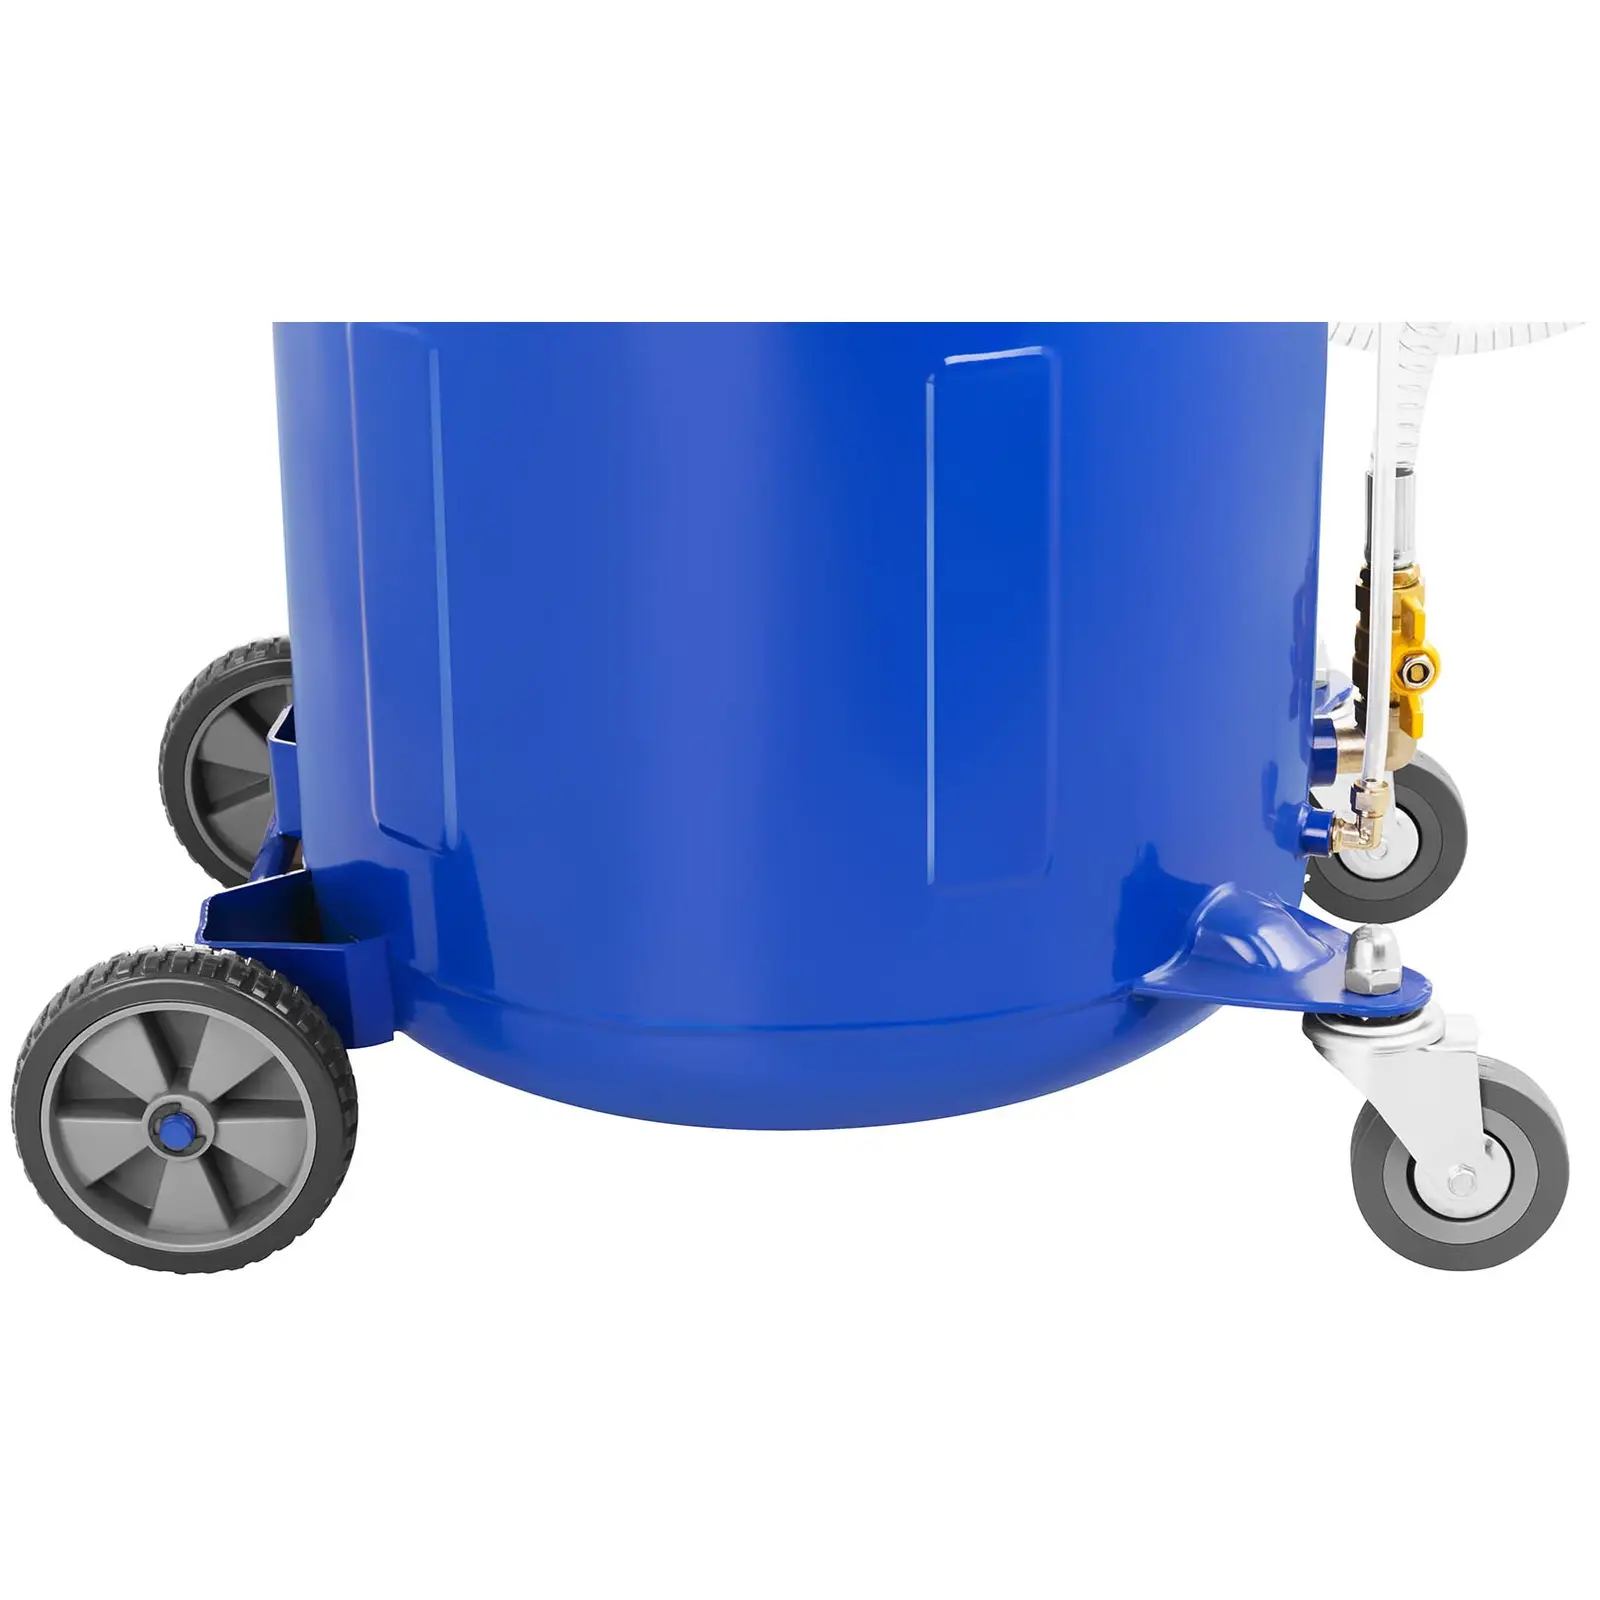 Engine Oil Extractor - 75 L Tank